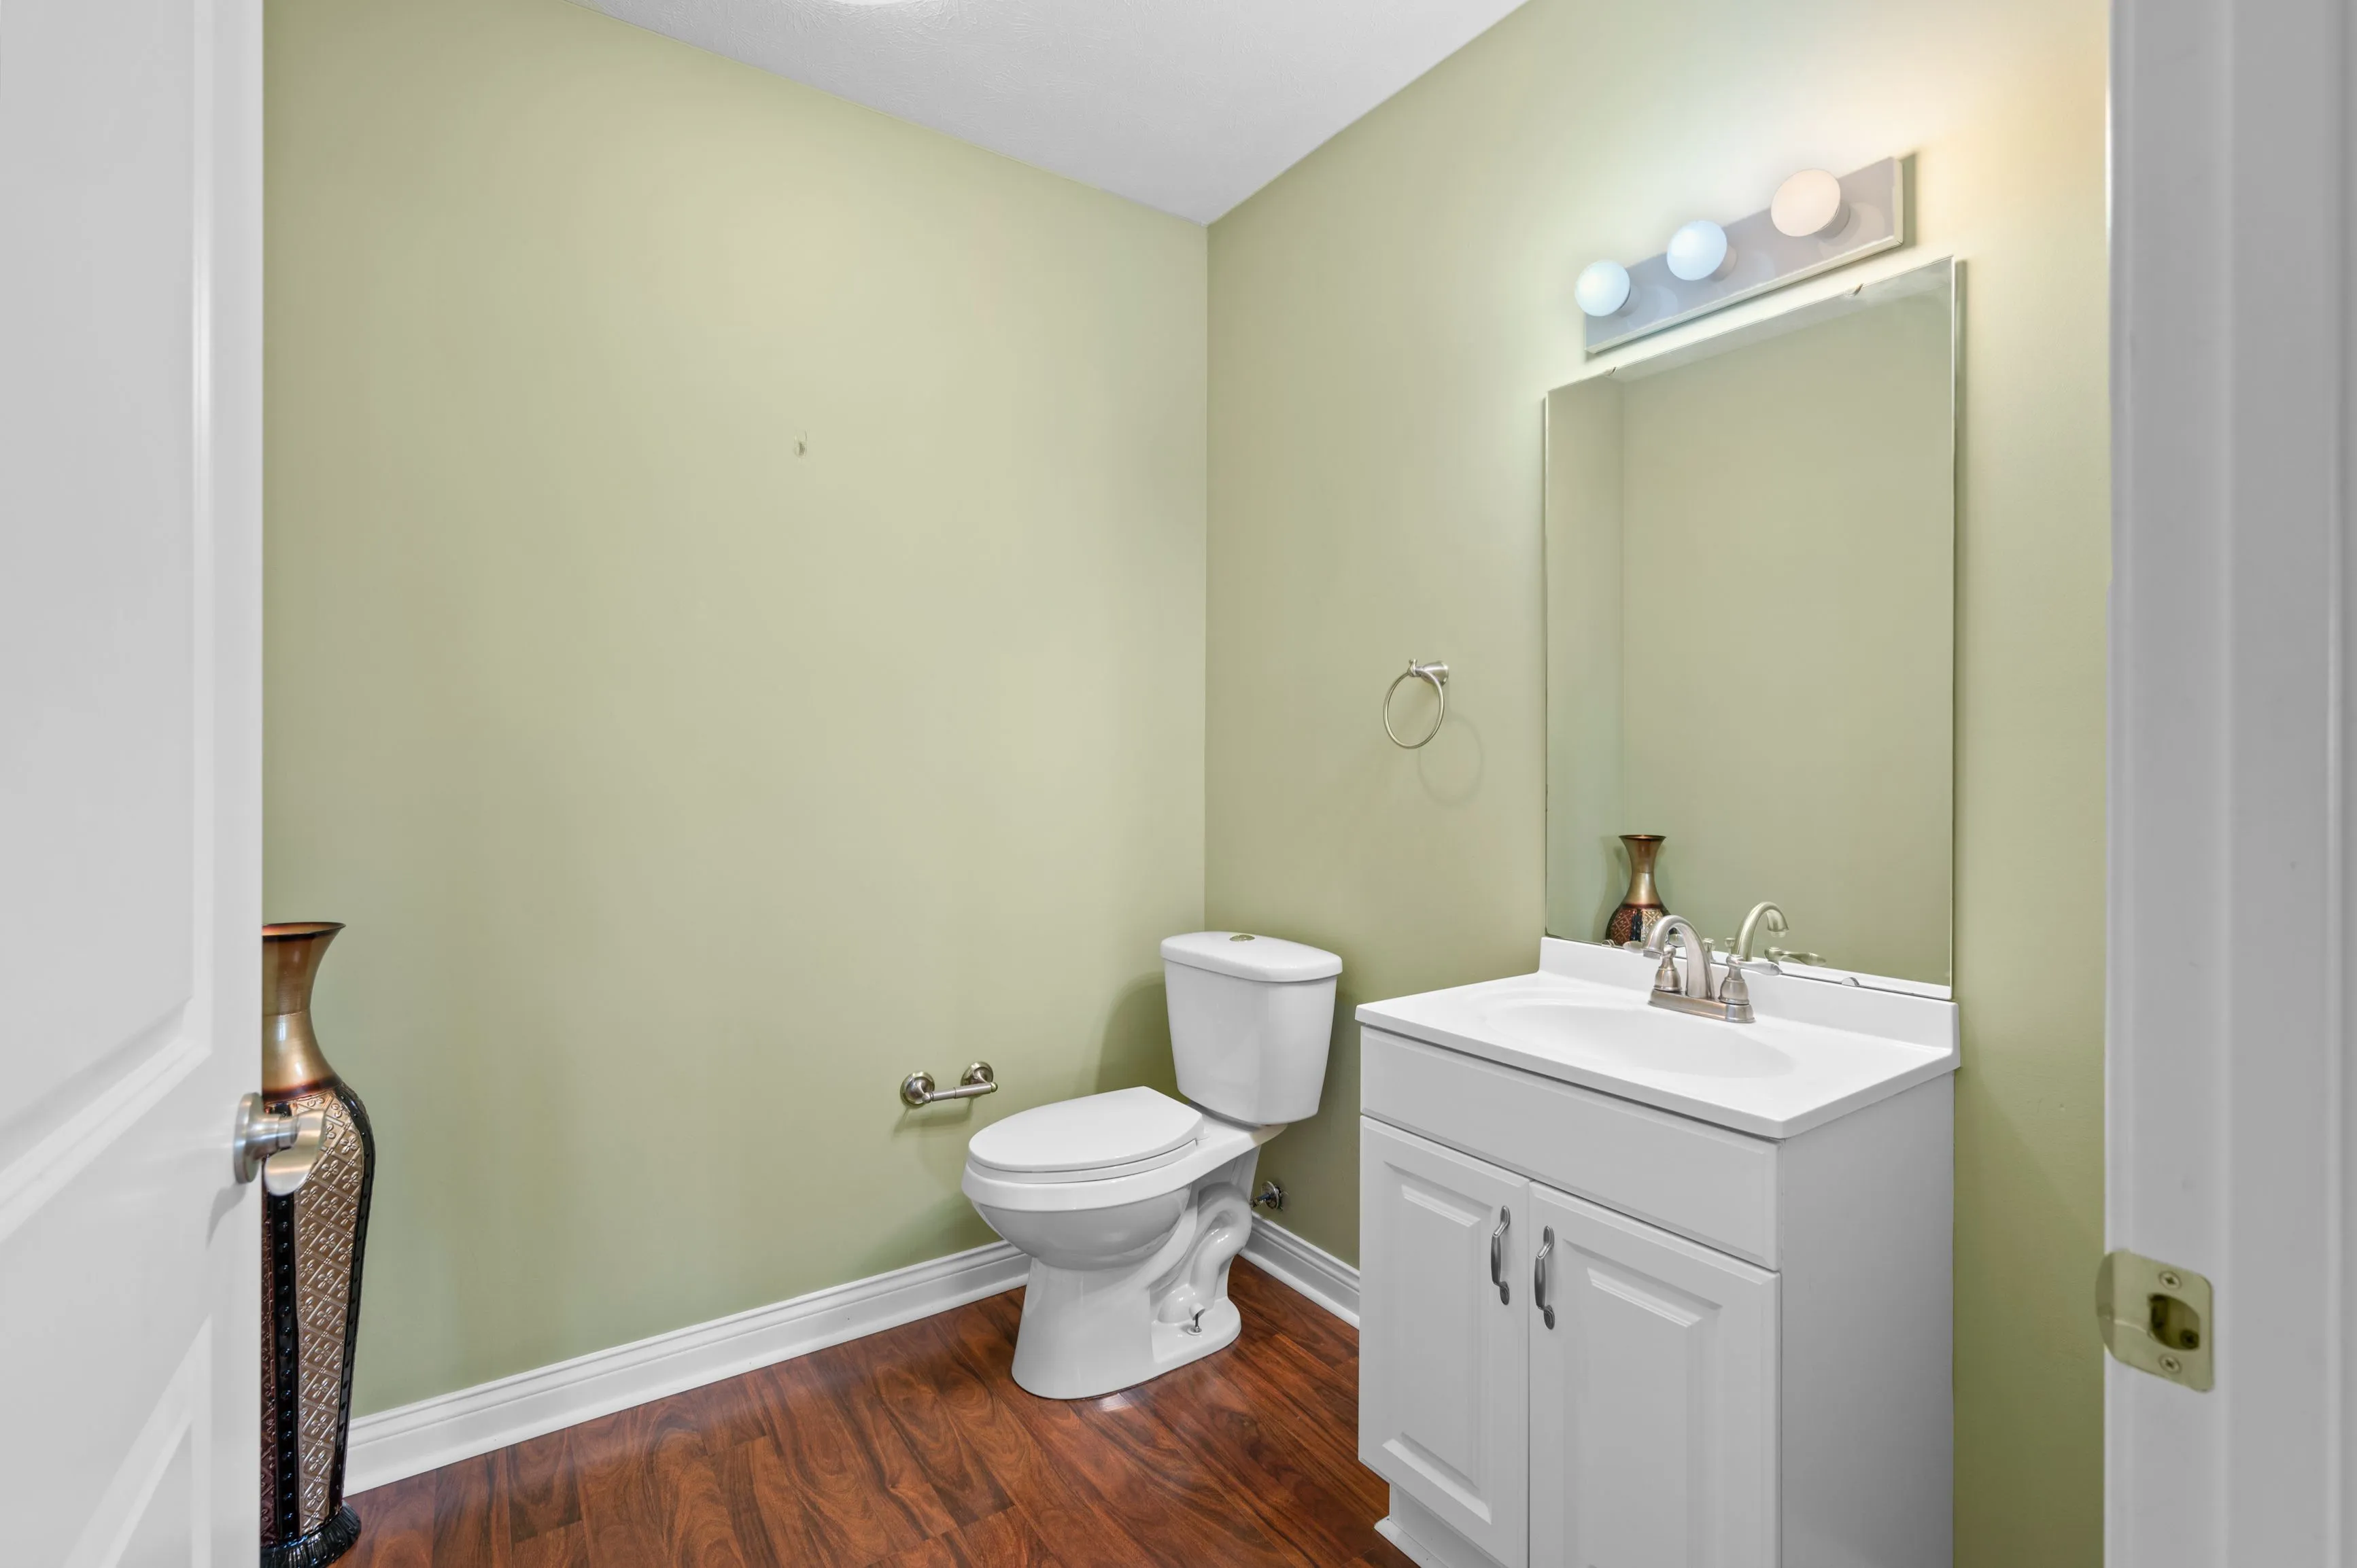 Small bathroom with light green walls, white fixtures, wooden floor, and vanity mirror with lights.